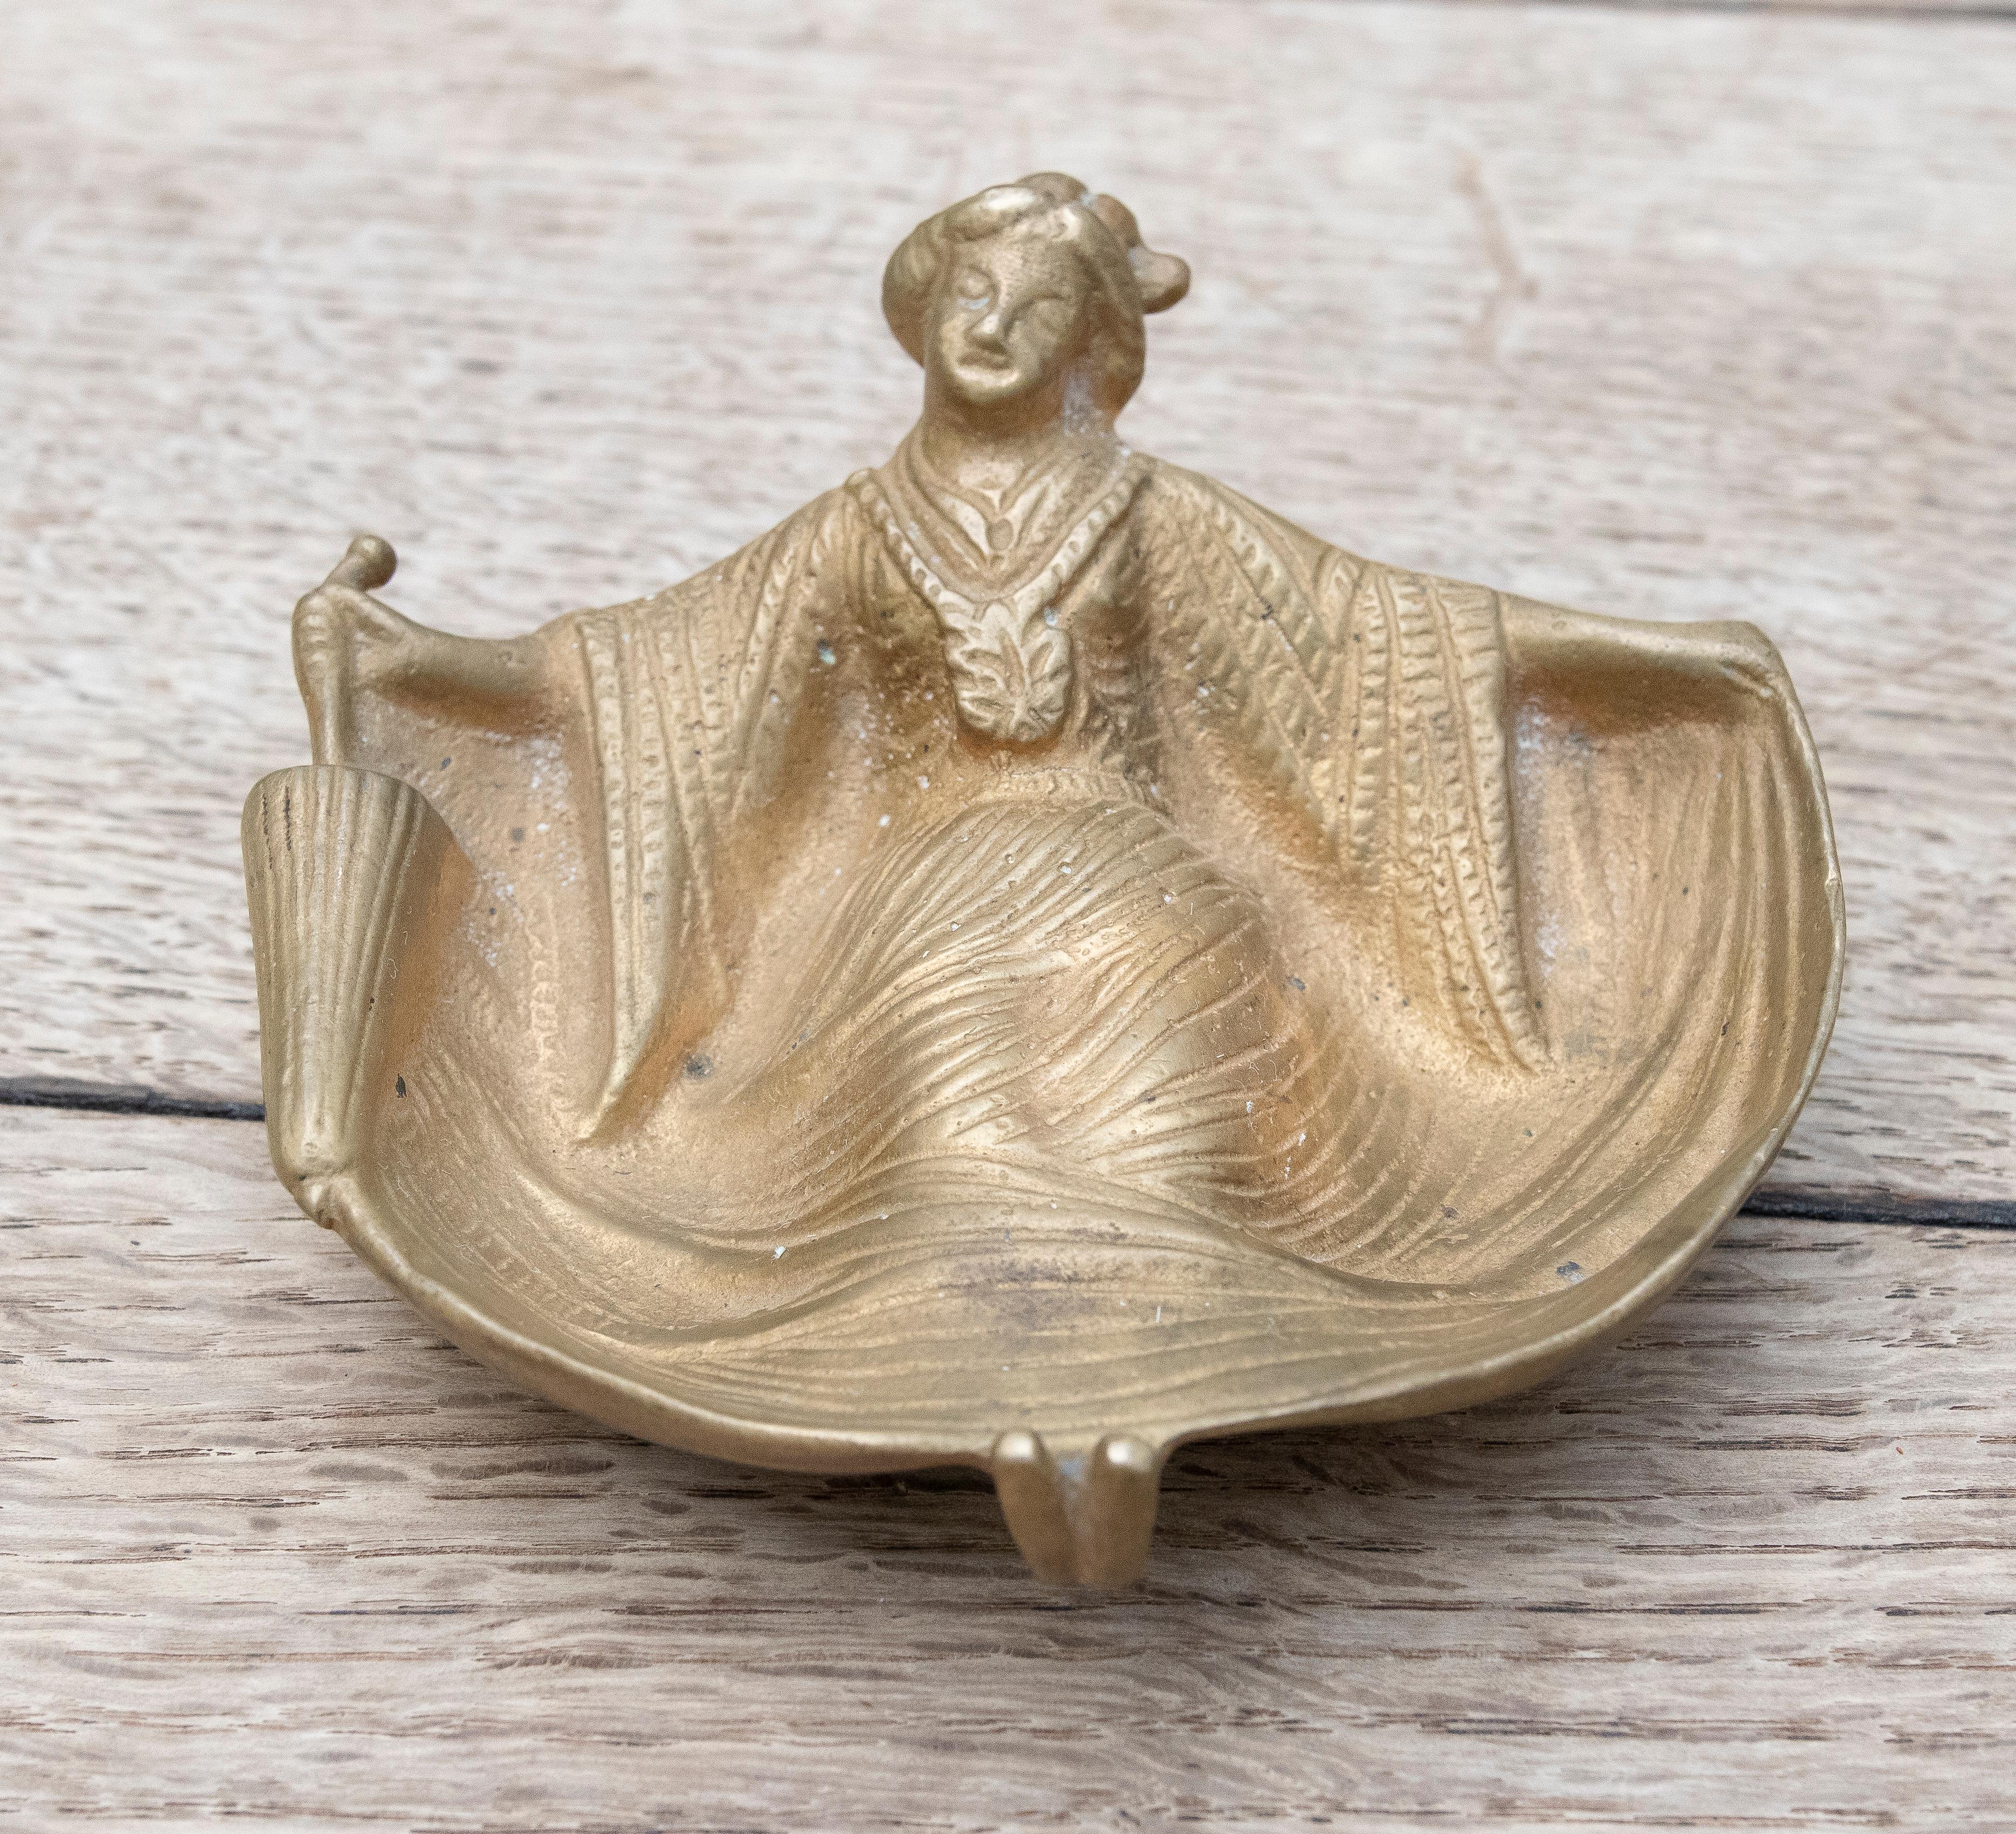 1930s Bronze ashtray of a woman dressed in front and nude at the back.